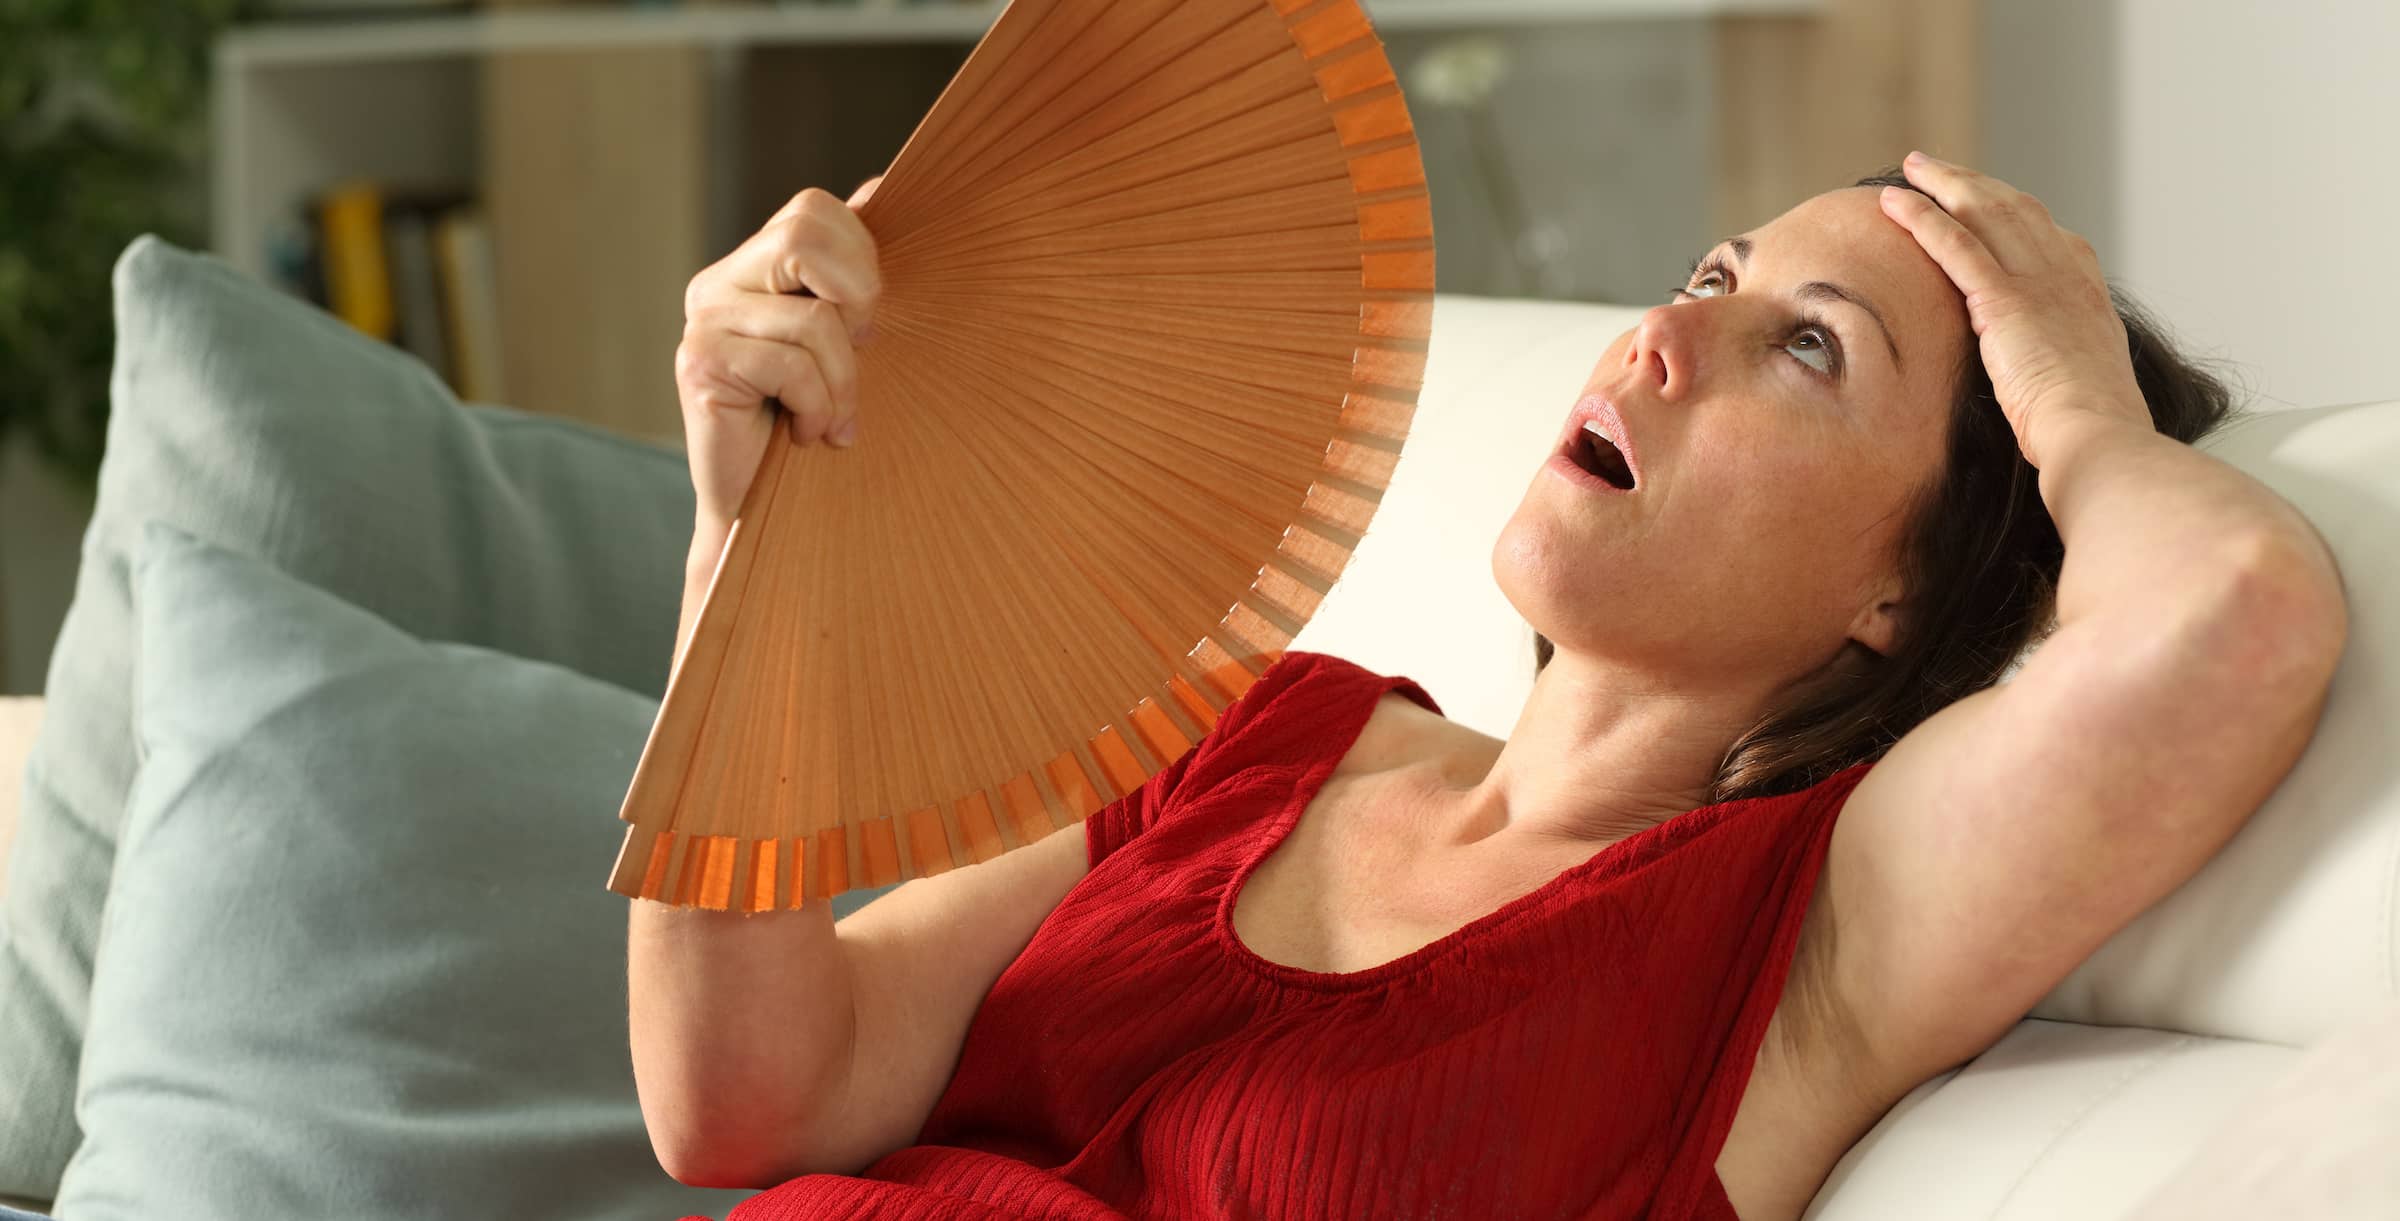 Woman fanning herself suffering heat at home